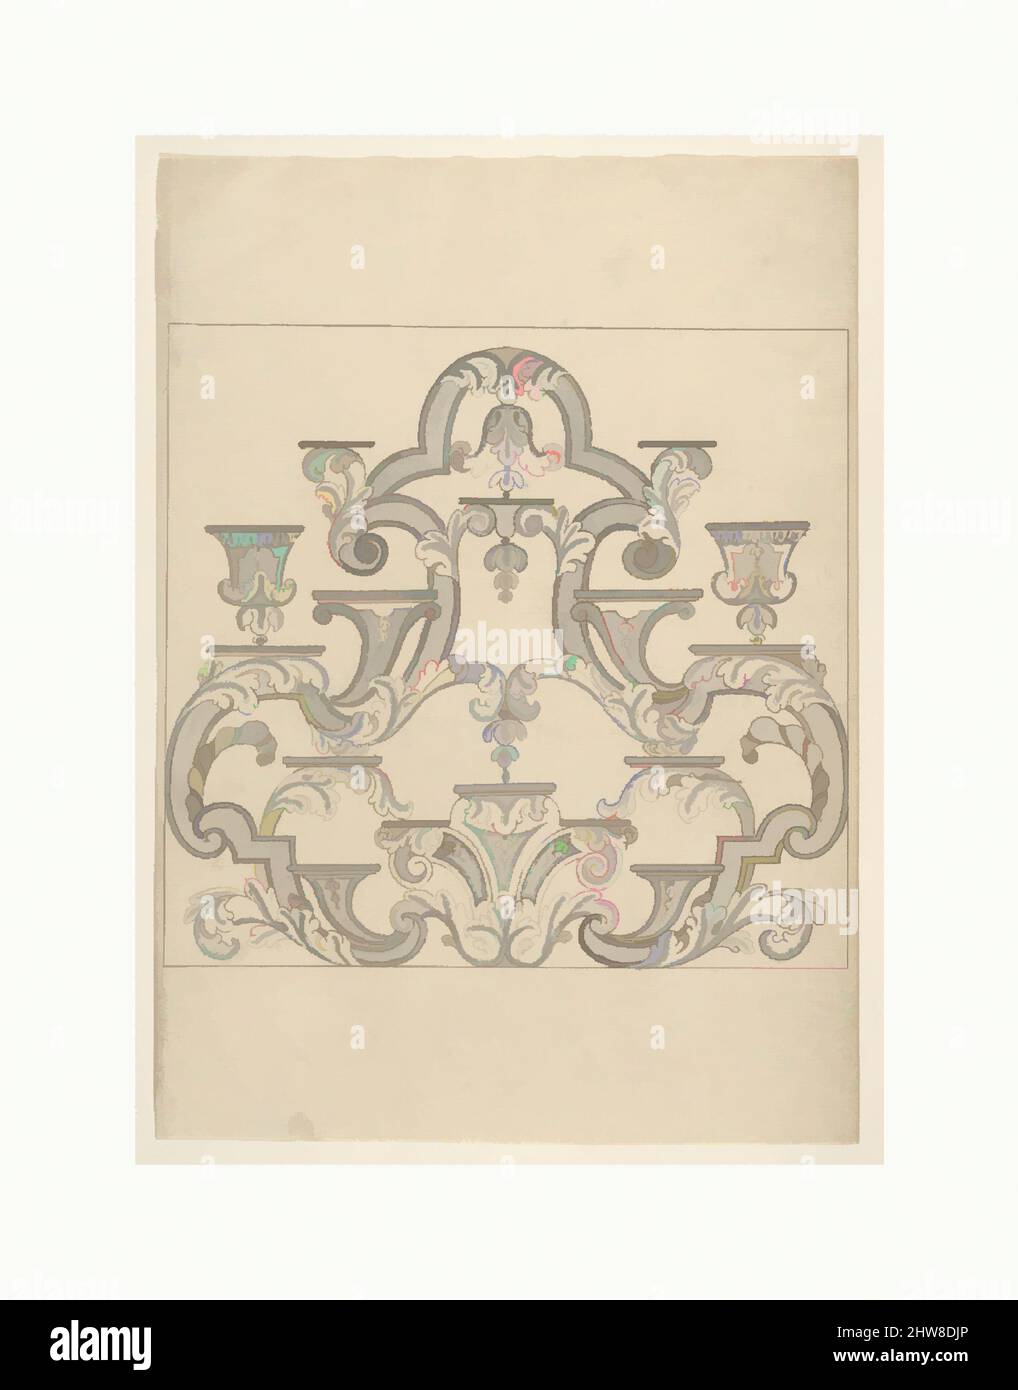 Art inspired by Design for a Shelf System to Display Porcelain, ca. 1700–1730, Pen and black ink, gray wash., Sheet: 10 15/16 × 7 7/8 in. (27.8 × 20 cm), Anonymous, 18th century, Design for a system for porcelain display, often found over the mantel of a chimneypiece or attached to the, Classic works modernized by Artotop with a splash of modernity. Shapes, color and value, eye-catching visual impact on art. Emotions through freedom of artworks in a contemporary way. A timeless message pursuing a wildly creative new direction. Artists turning to the digital medium and creating the Artotop NFT Stock Photo